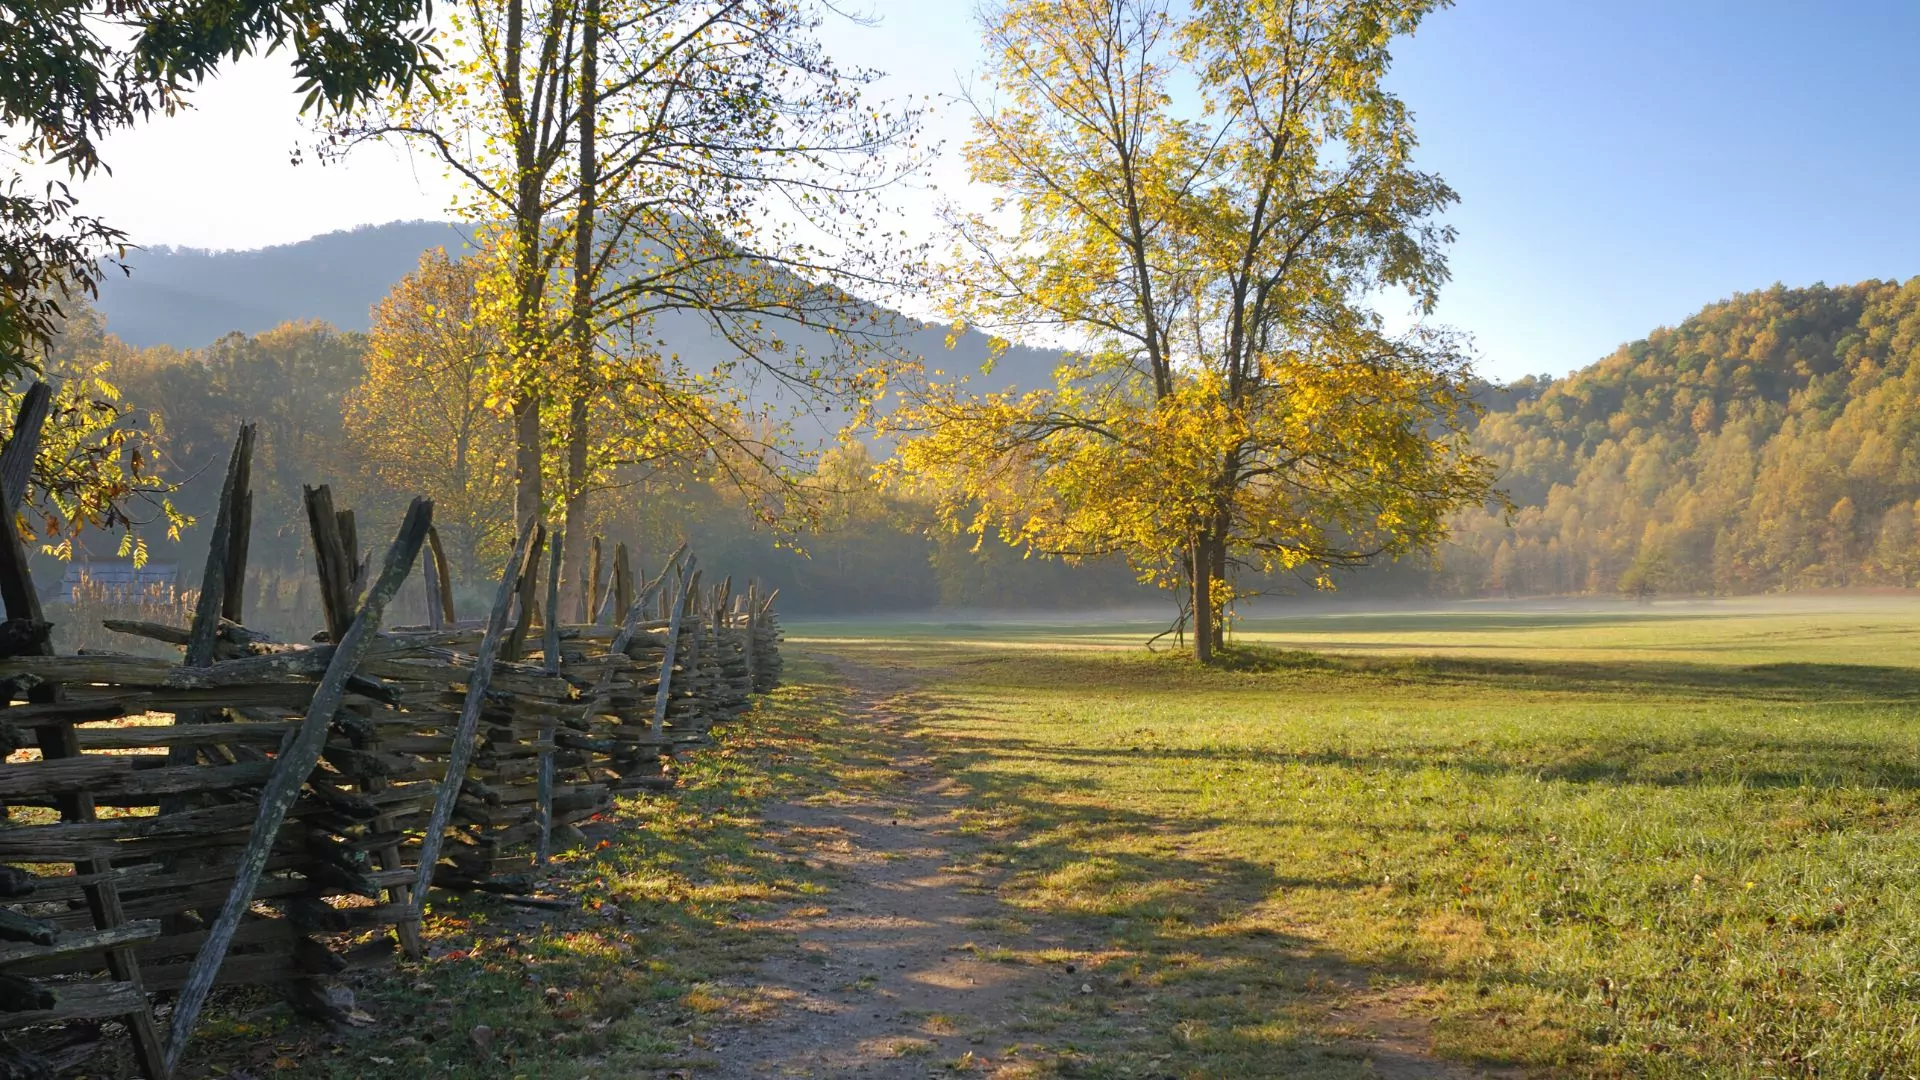 An historic split rail fence extends from the left foreground back into a sunny autumnal field with mountains behind